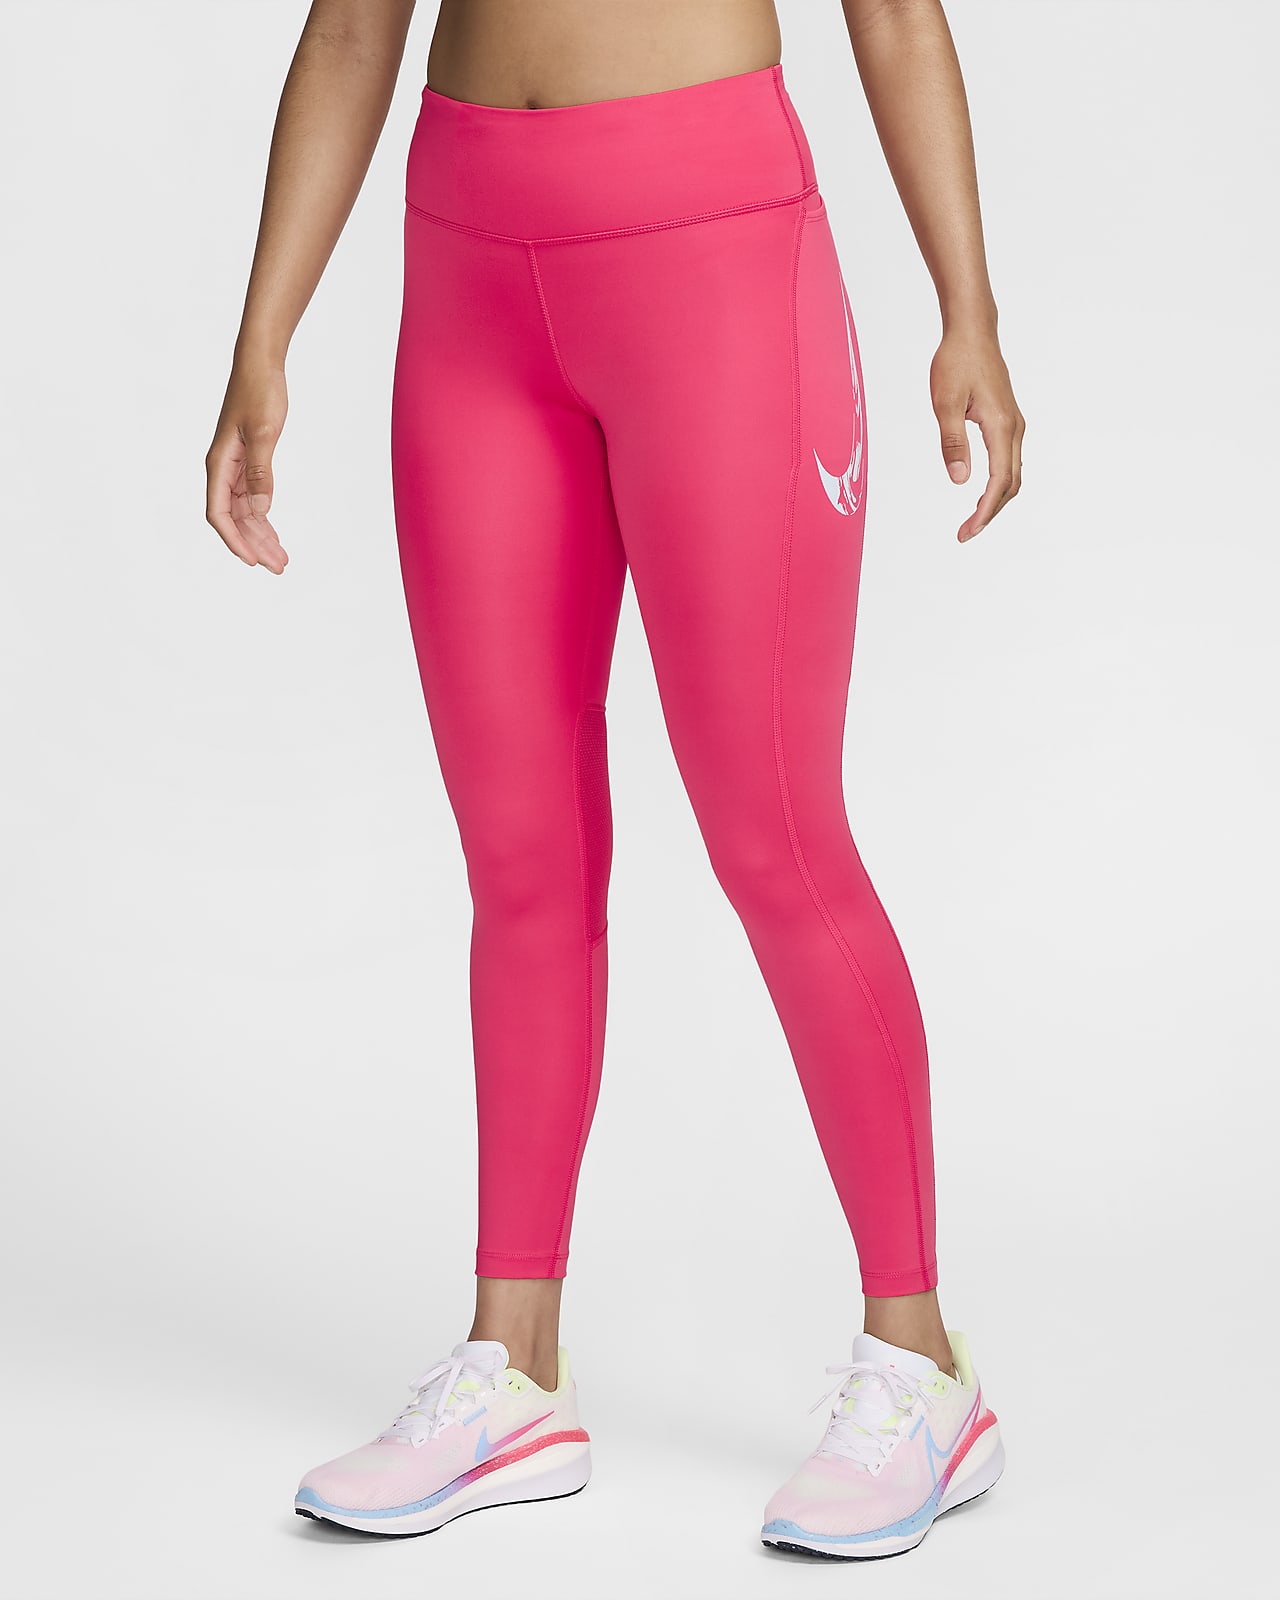 Nike Fast Swoosh Women's Mid-Rise 7/8 Running Leggings with Pockets